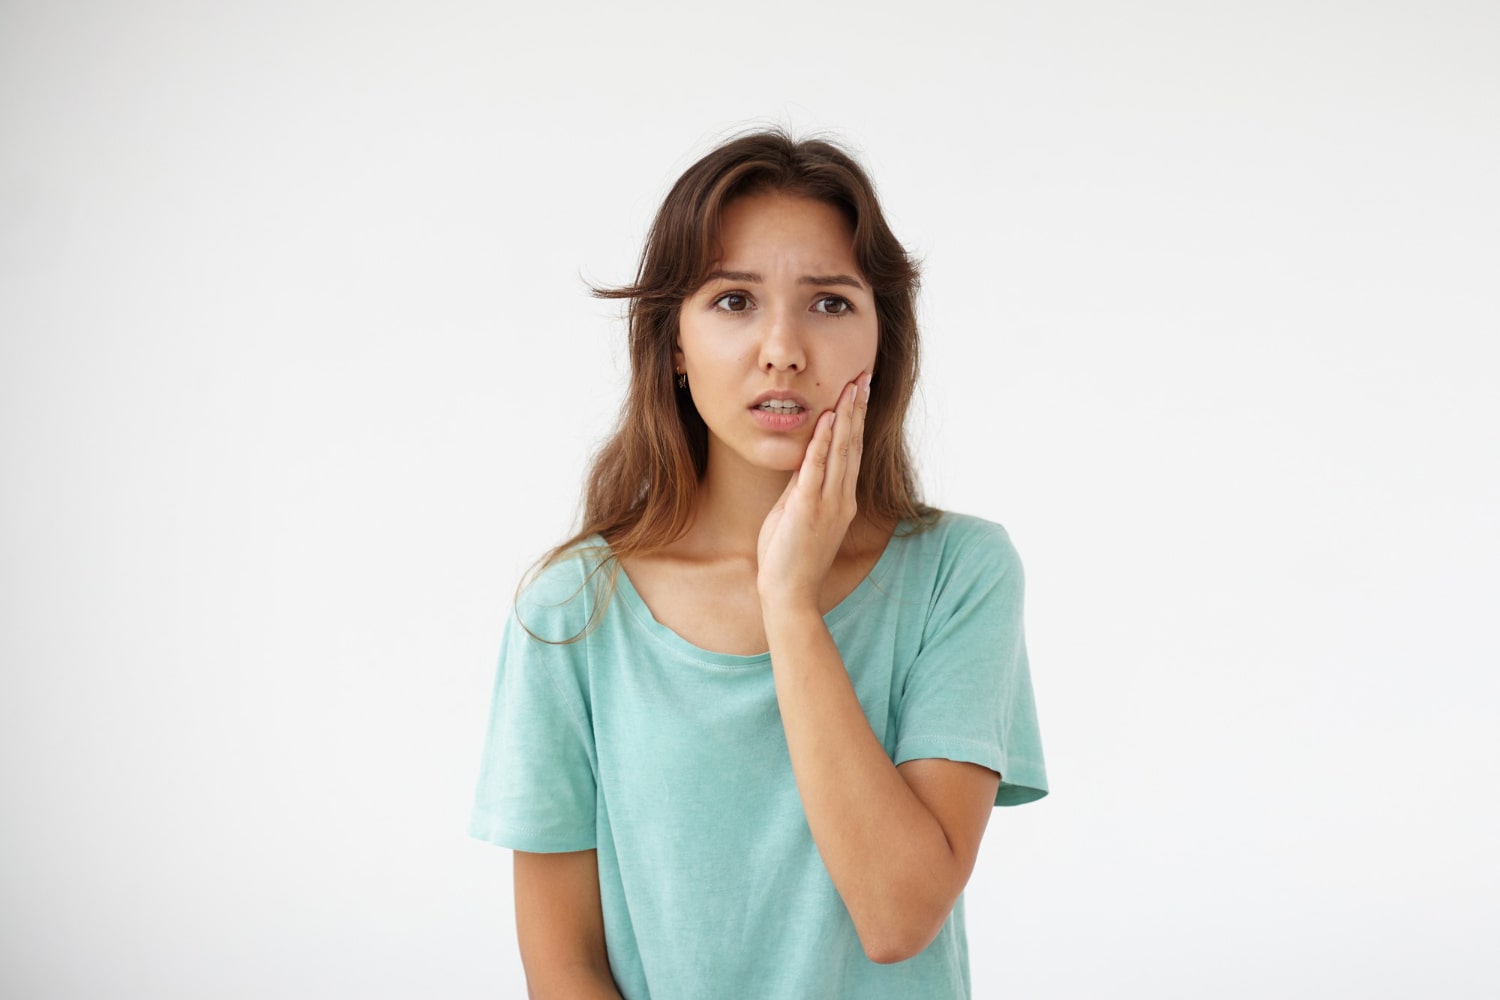 expressive young woman posing thinking if can wisdom teeth fall out naturally